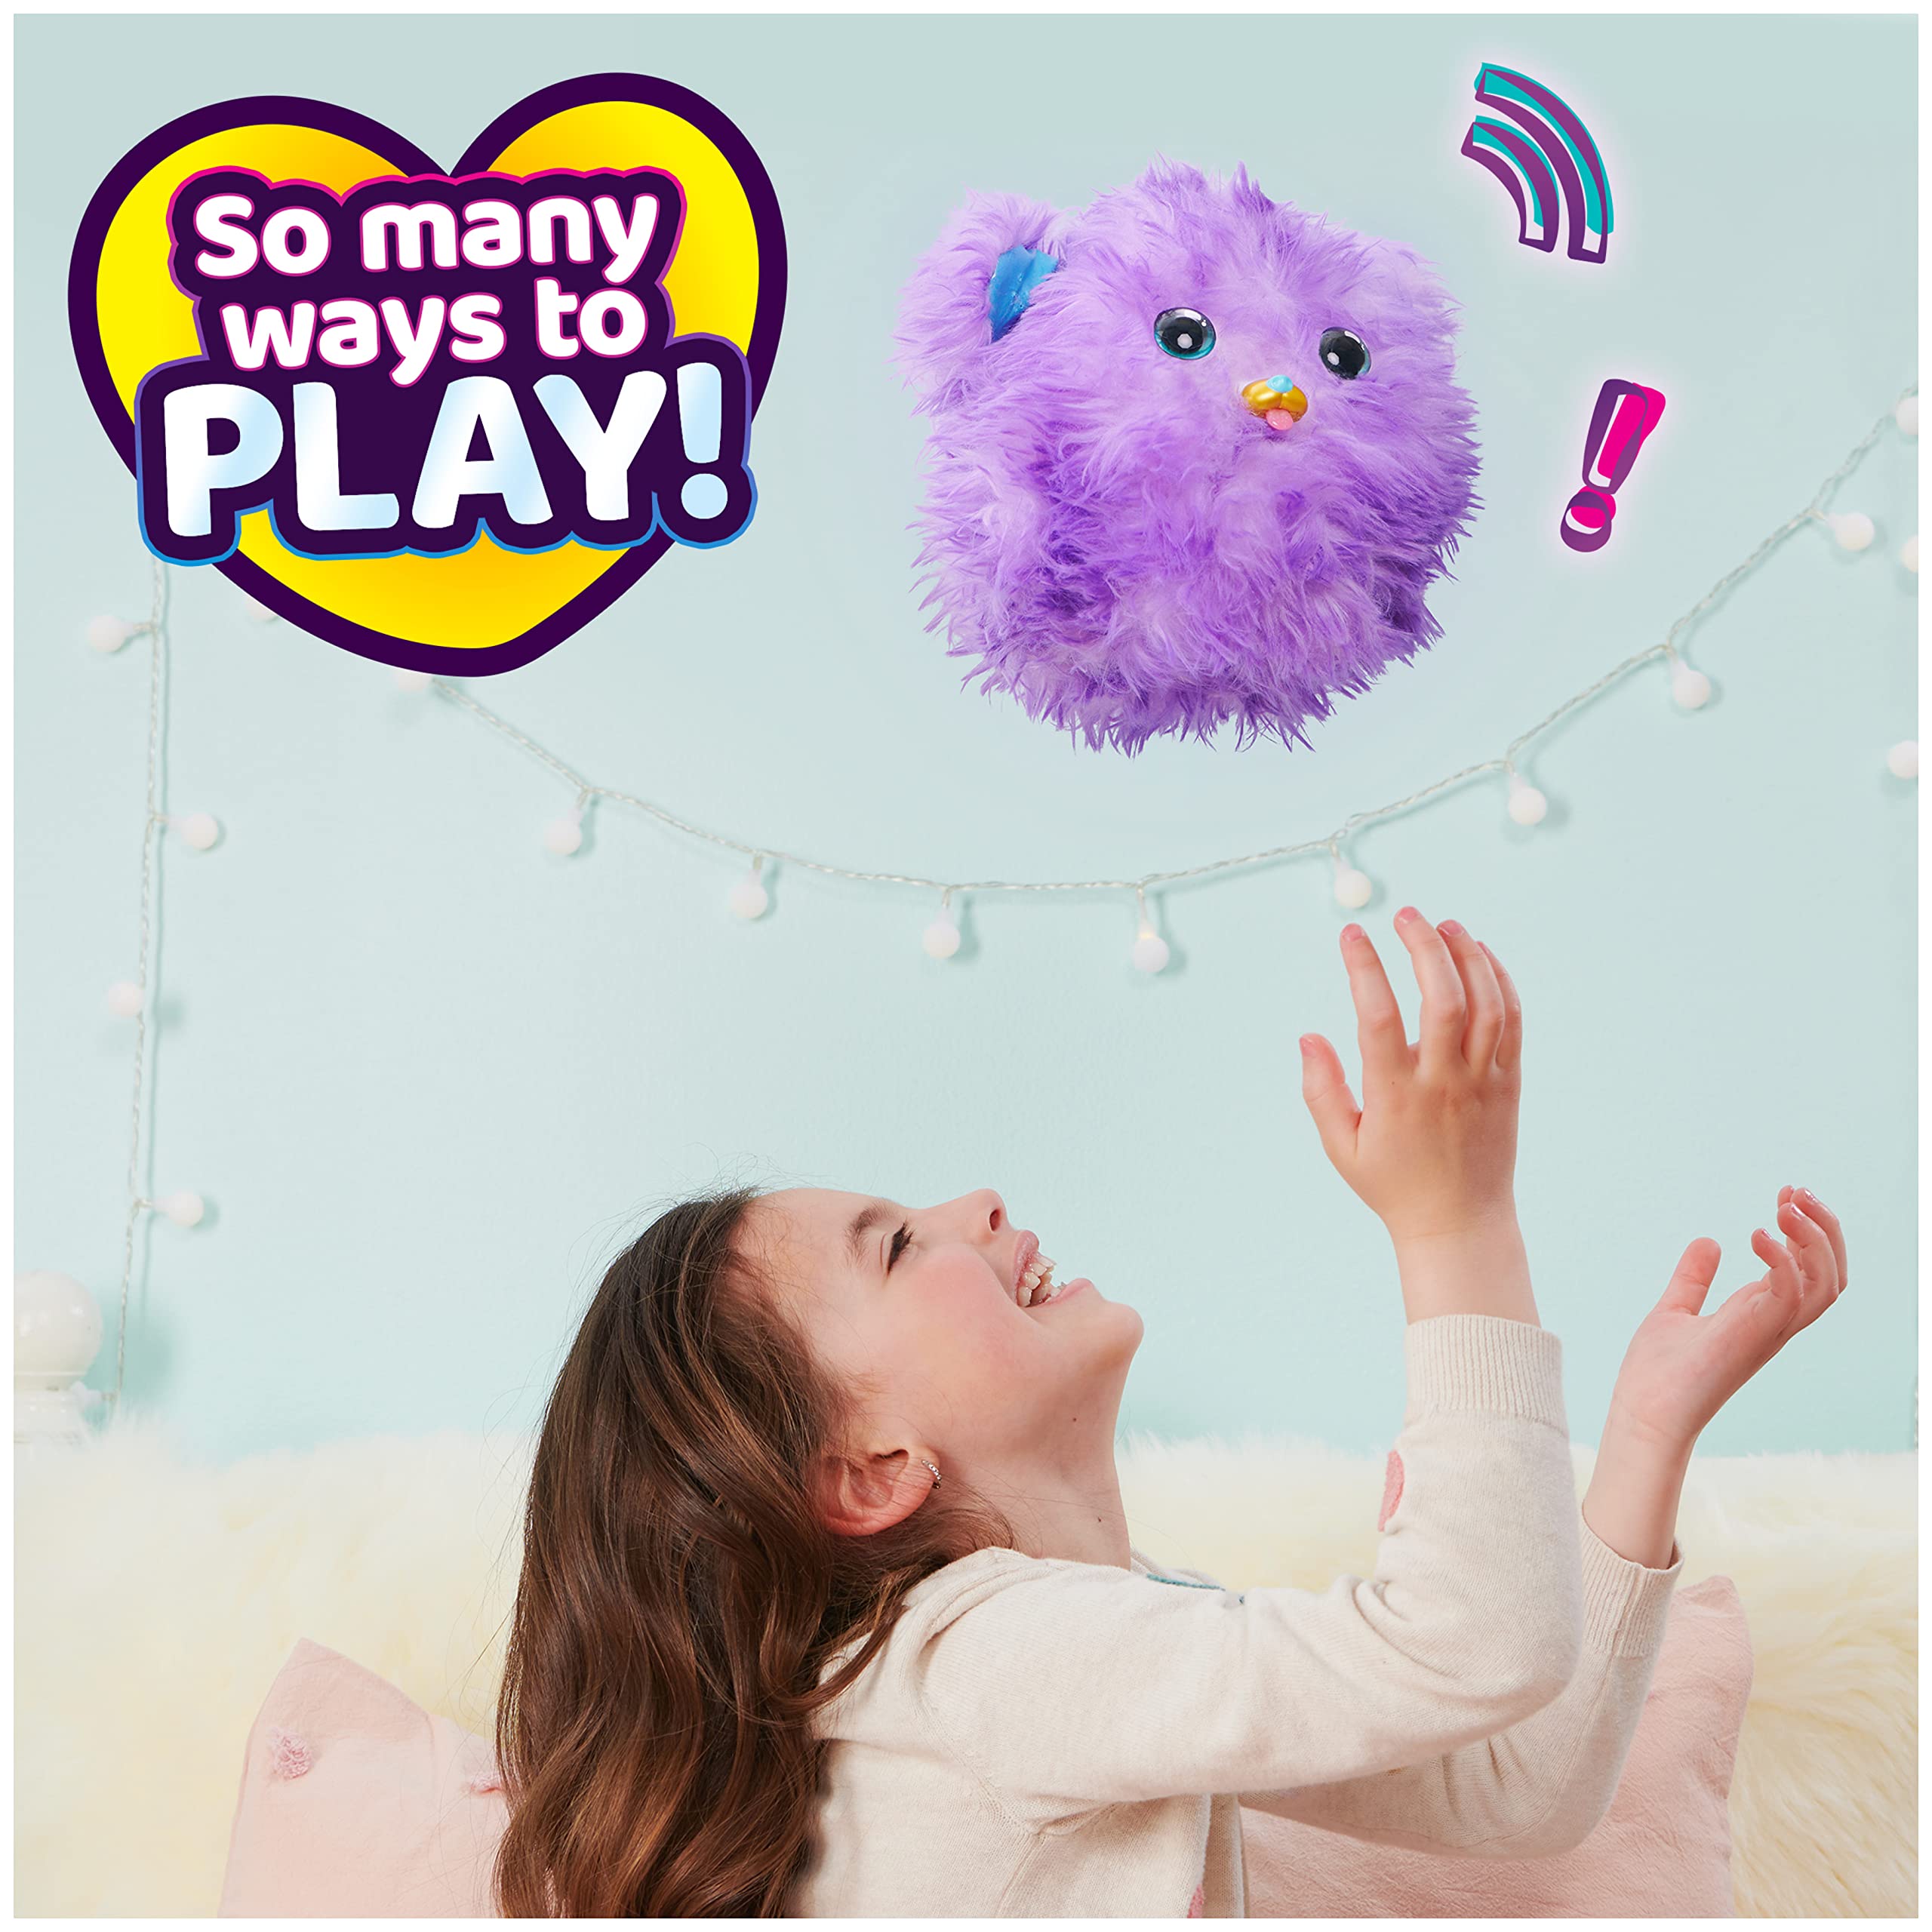 What the Fluff, Pupper-Fluff, Surprise Reveal Interactive Toy Pet With Over 100 Sounds And Reactions, Kids Toys For Girls Ages 5 And up